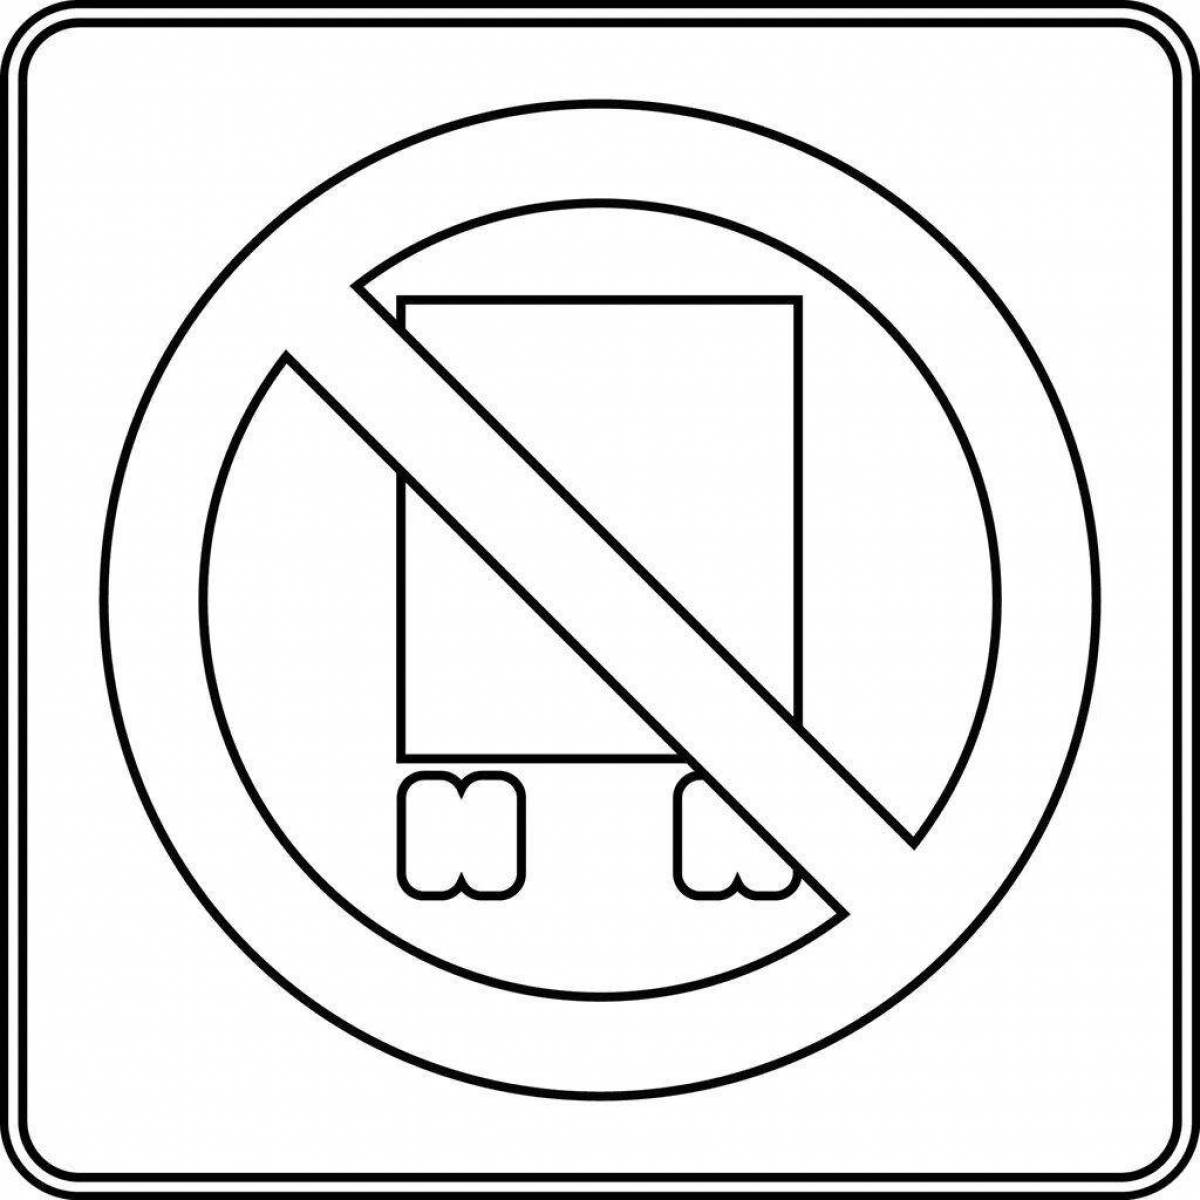 Coloring page bold no entry sign